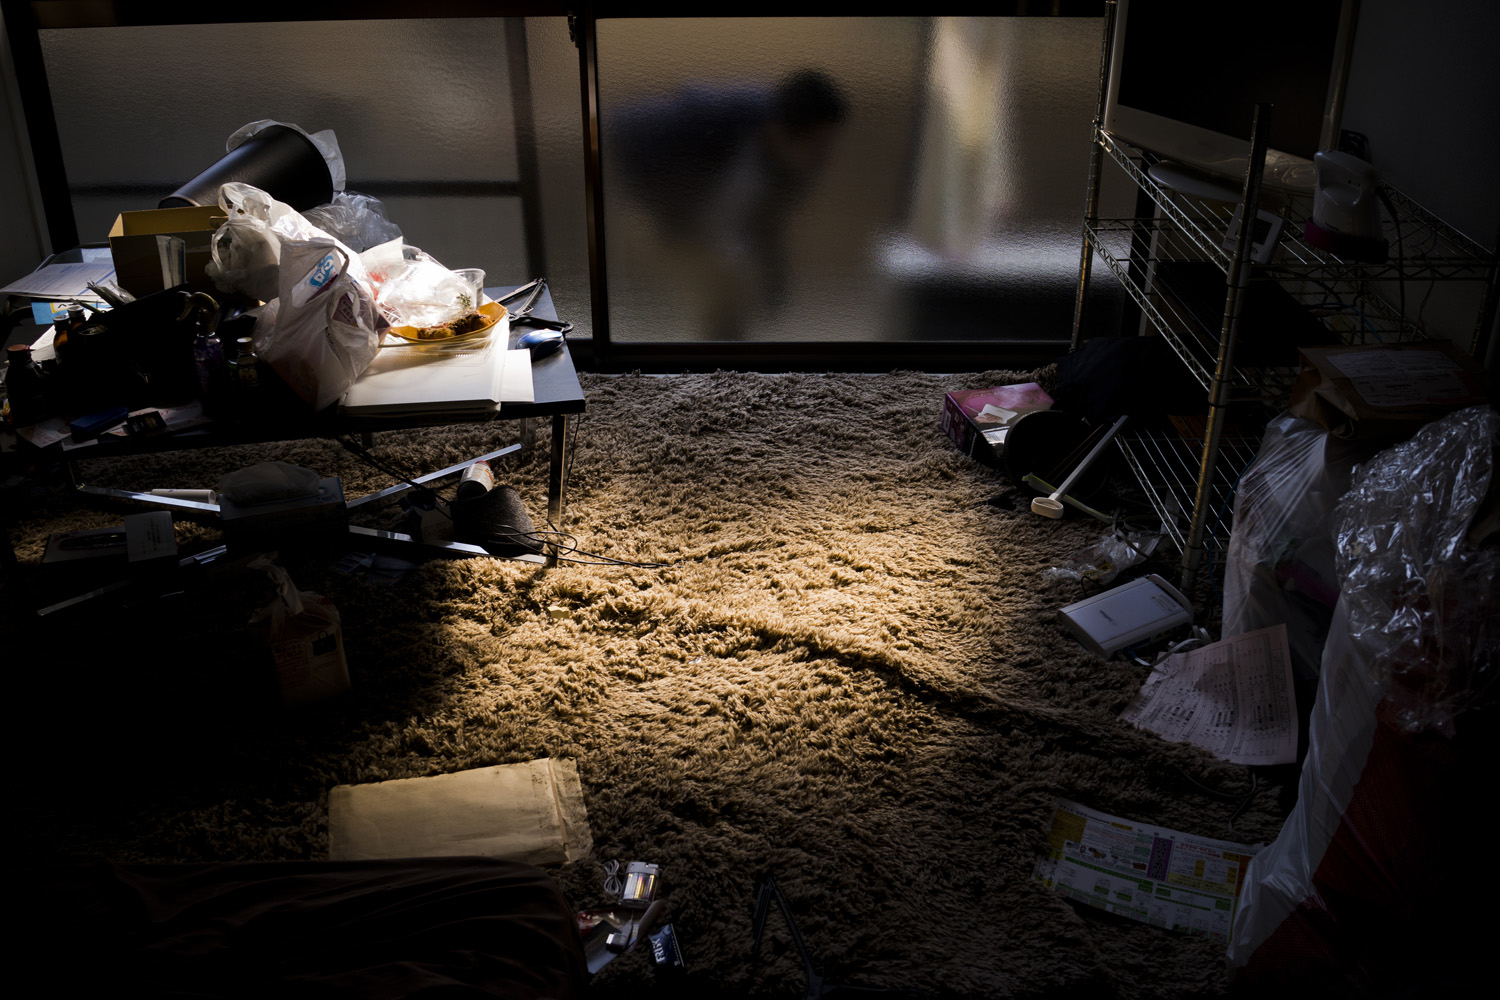 Japan, Fukushima City, 2014. The landlord checks the outside window of a one bedroom apartment rented to a decontamination worker who committed suicide by deliberately breathing in carbon monoxide the night before. Suicides in Fukushima have been on the rise since the Fukushima Daiichi Nuclear Power Station in 2011.